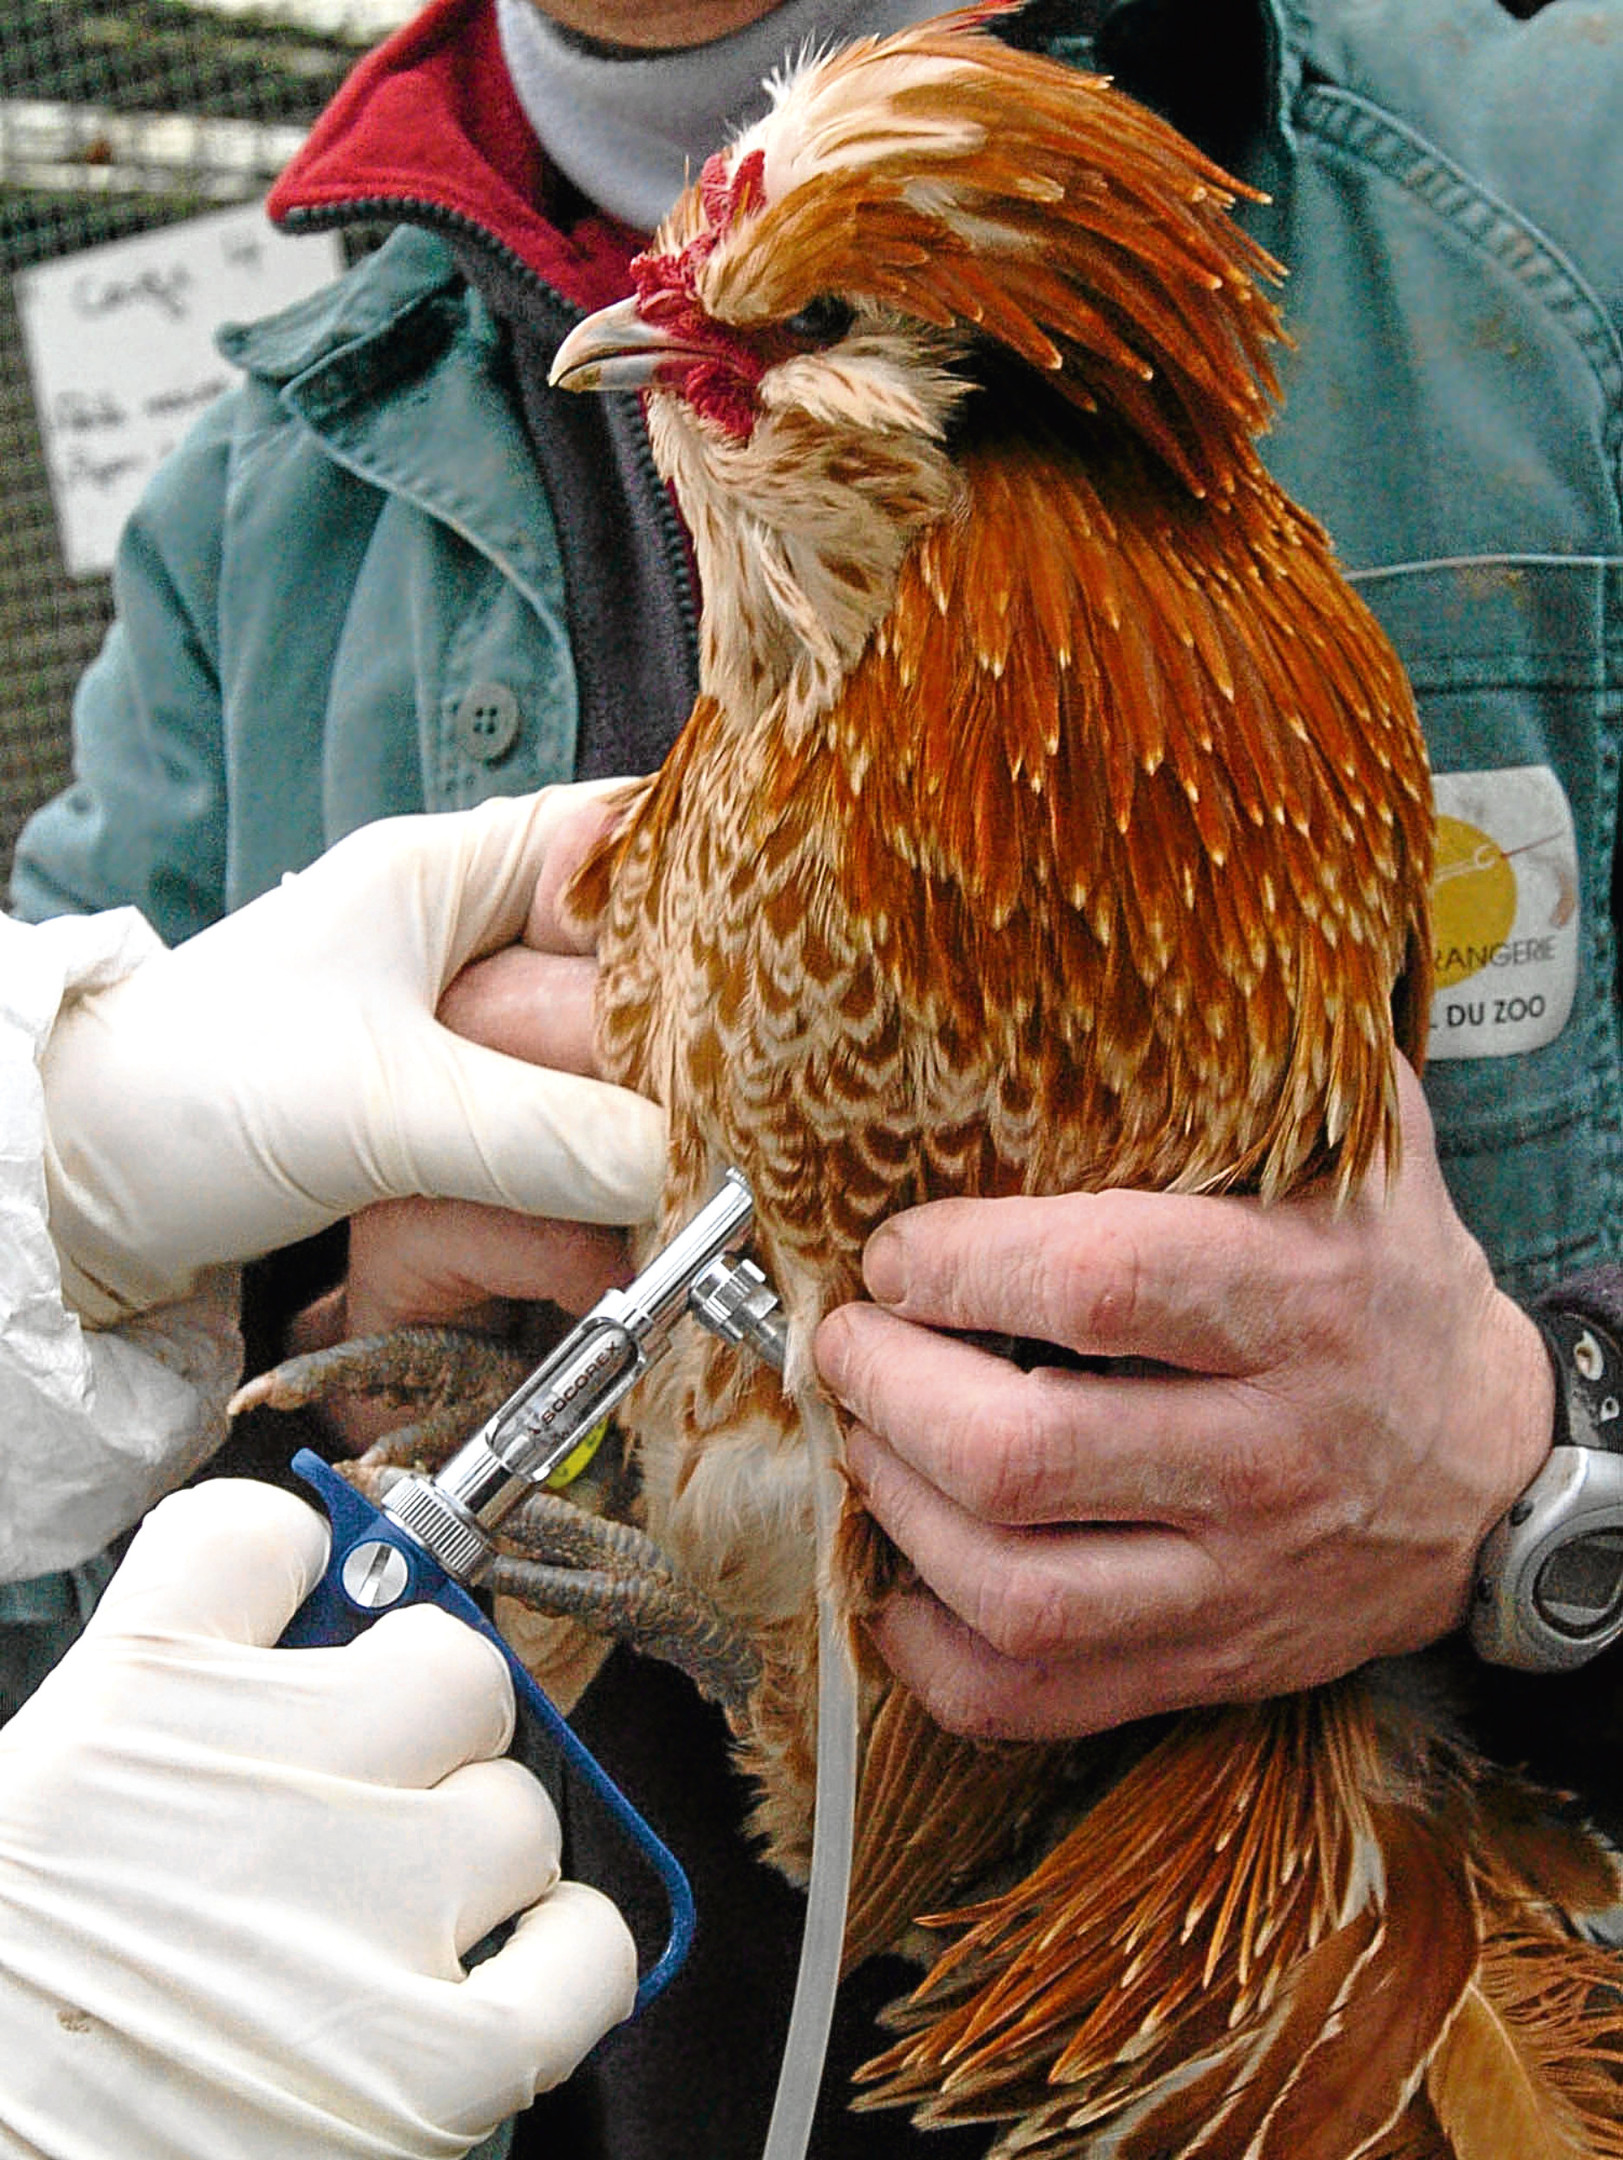 Government has been urged to incentivise poultry farmers to make better use of vaccines,